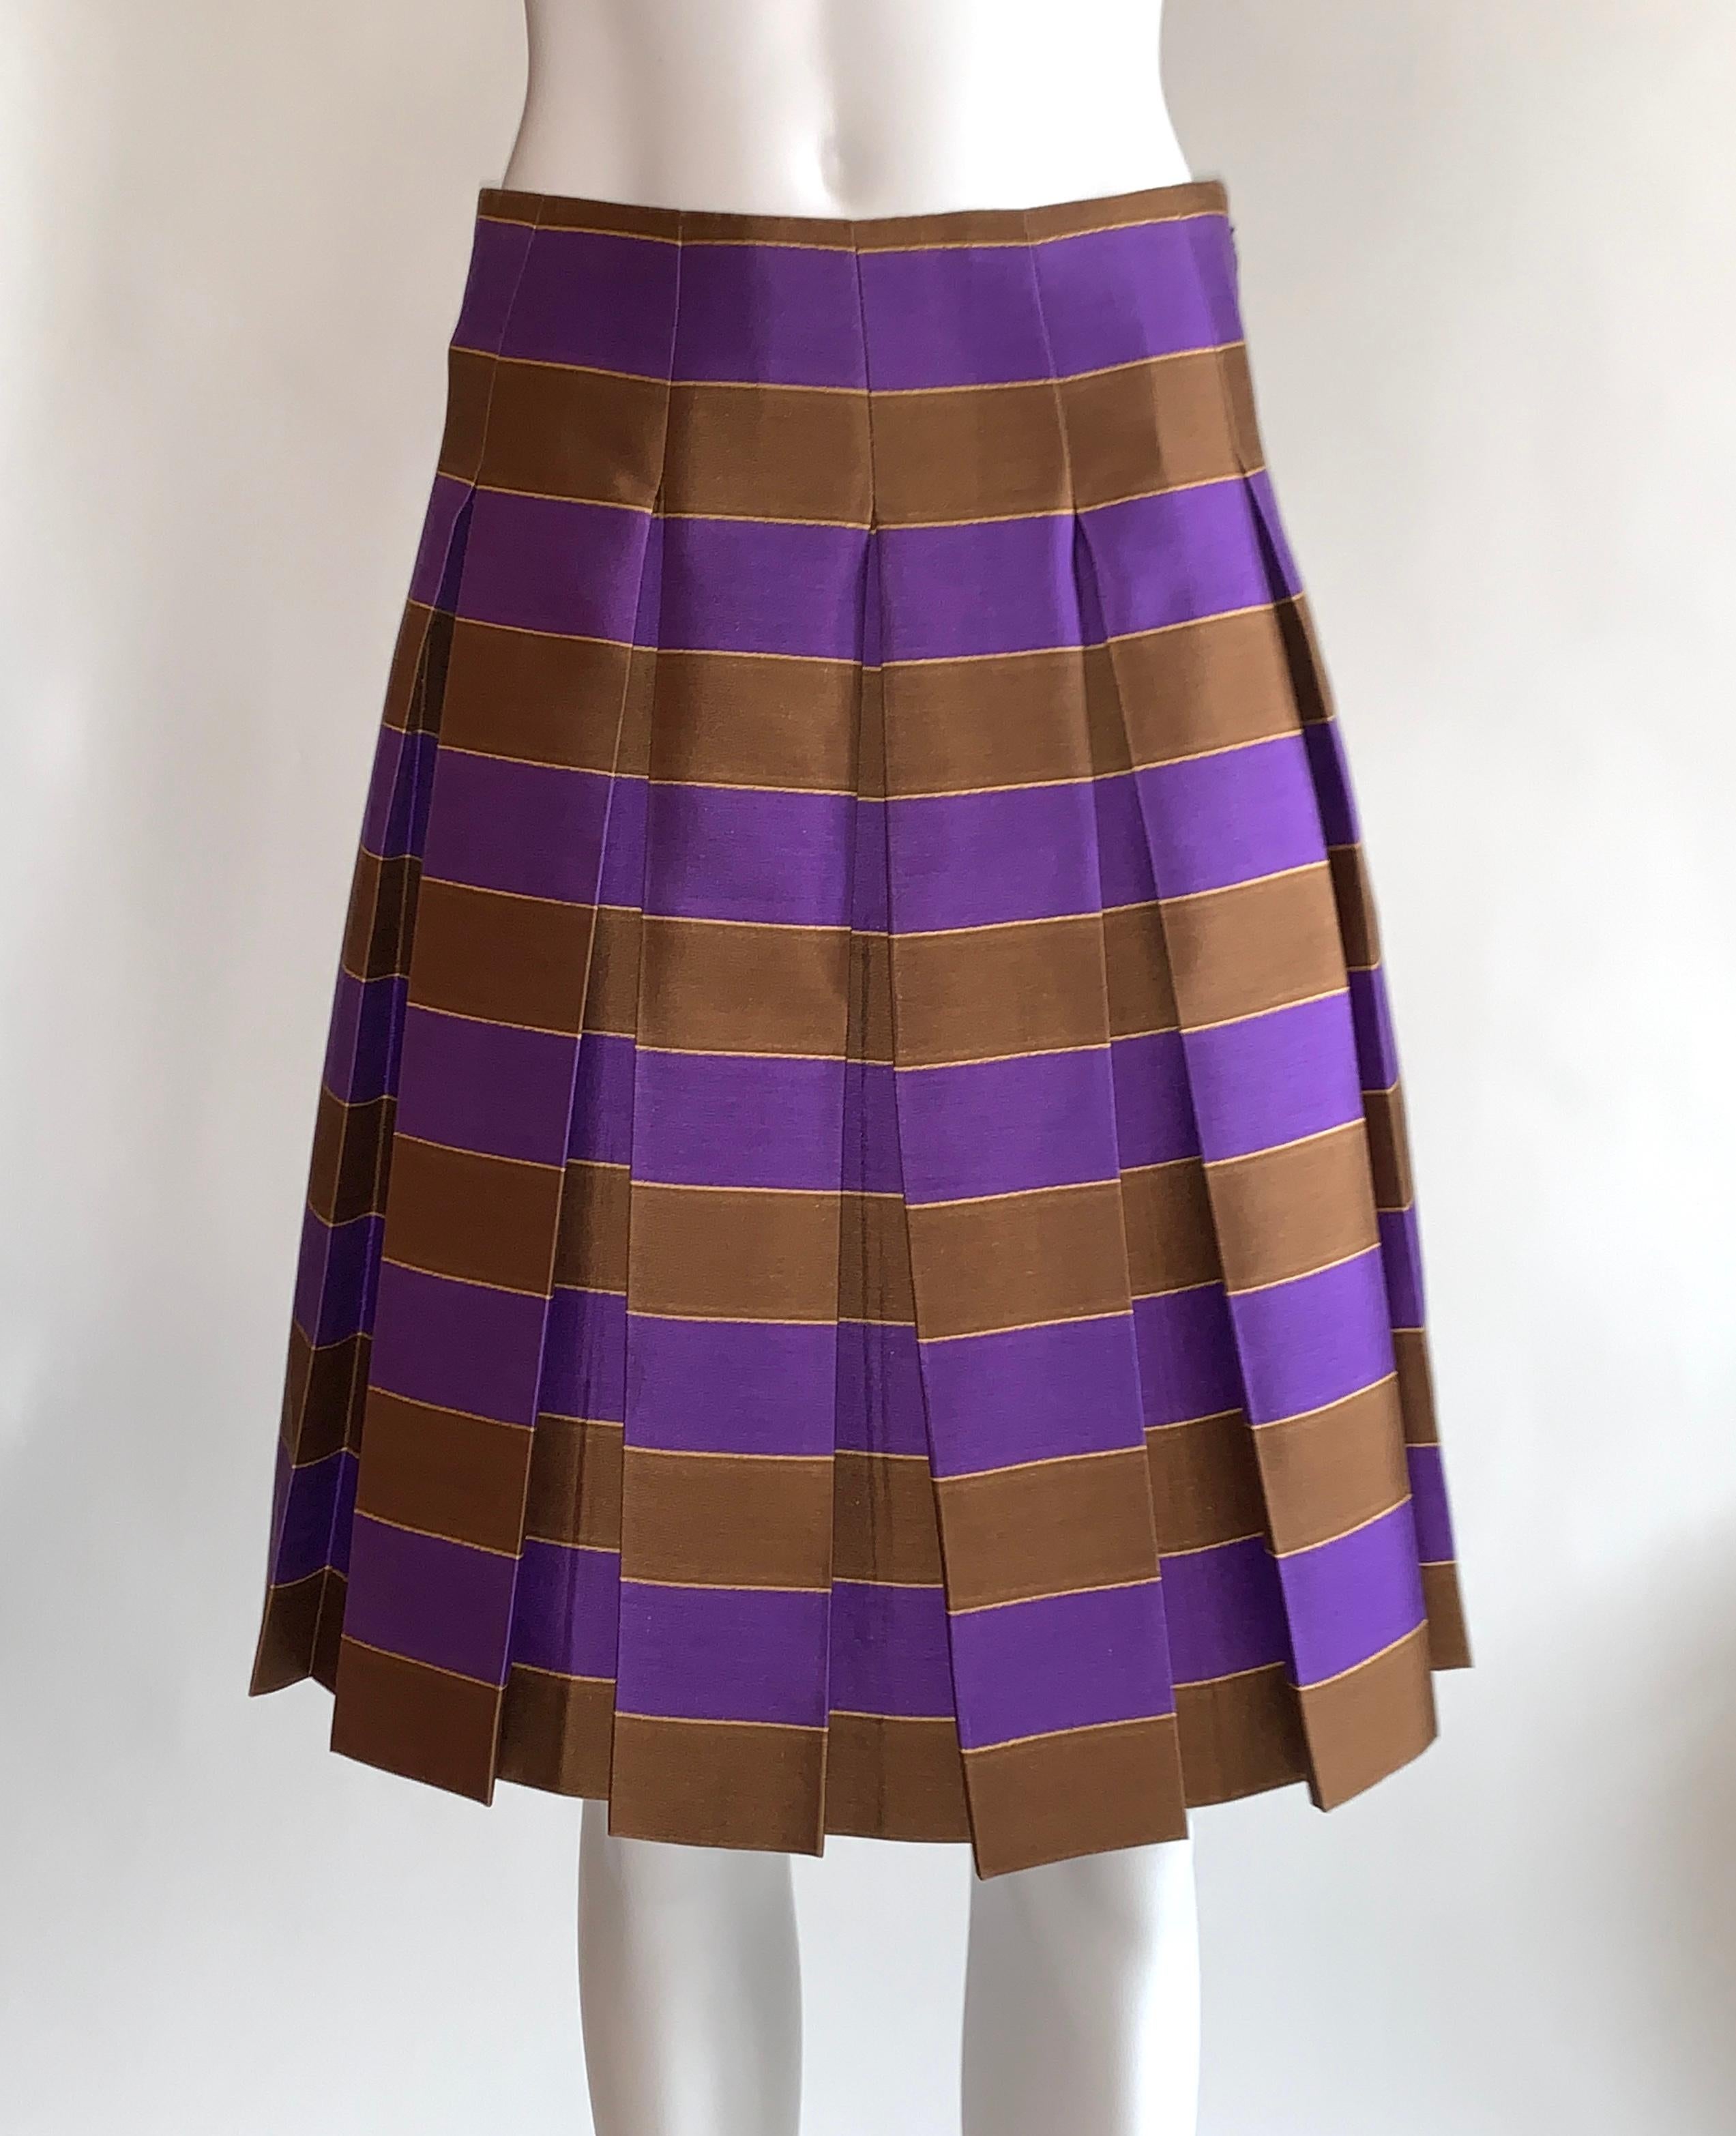 Prada pleated A line skirt in purple and brown stripes with golden yellow accent stripe. Side zip and hook and eye. 

As seen in orange color way of Prada Spring 2005 show, look 25.

58% wool, 42% silk.

Made in Italy. Size IT 38, approximate US 2.